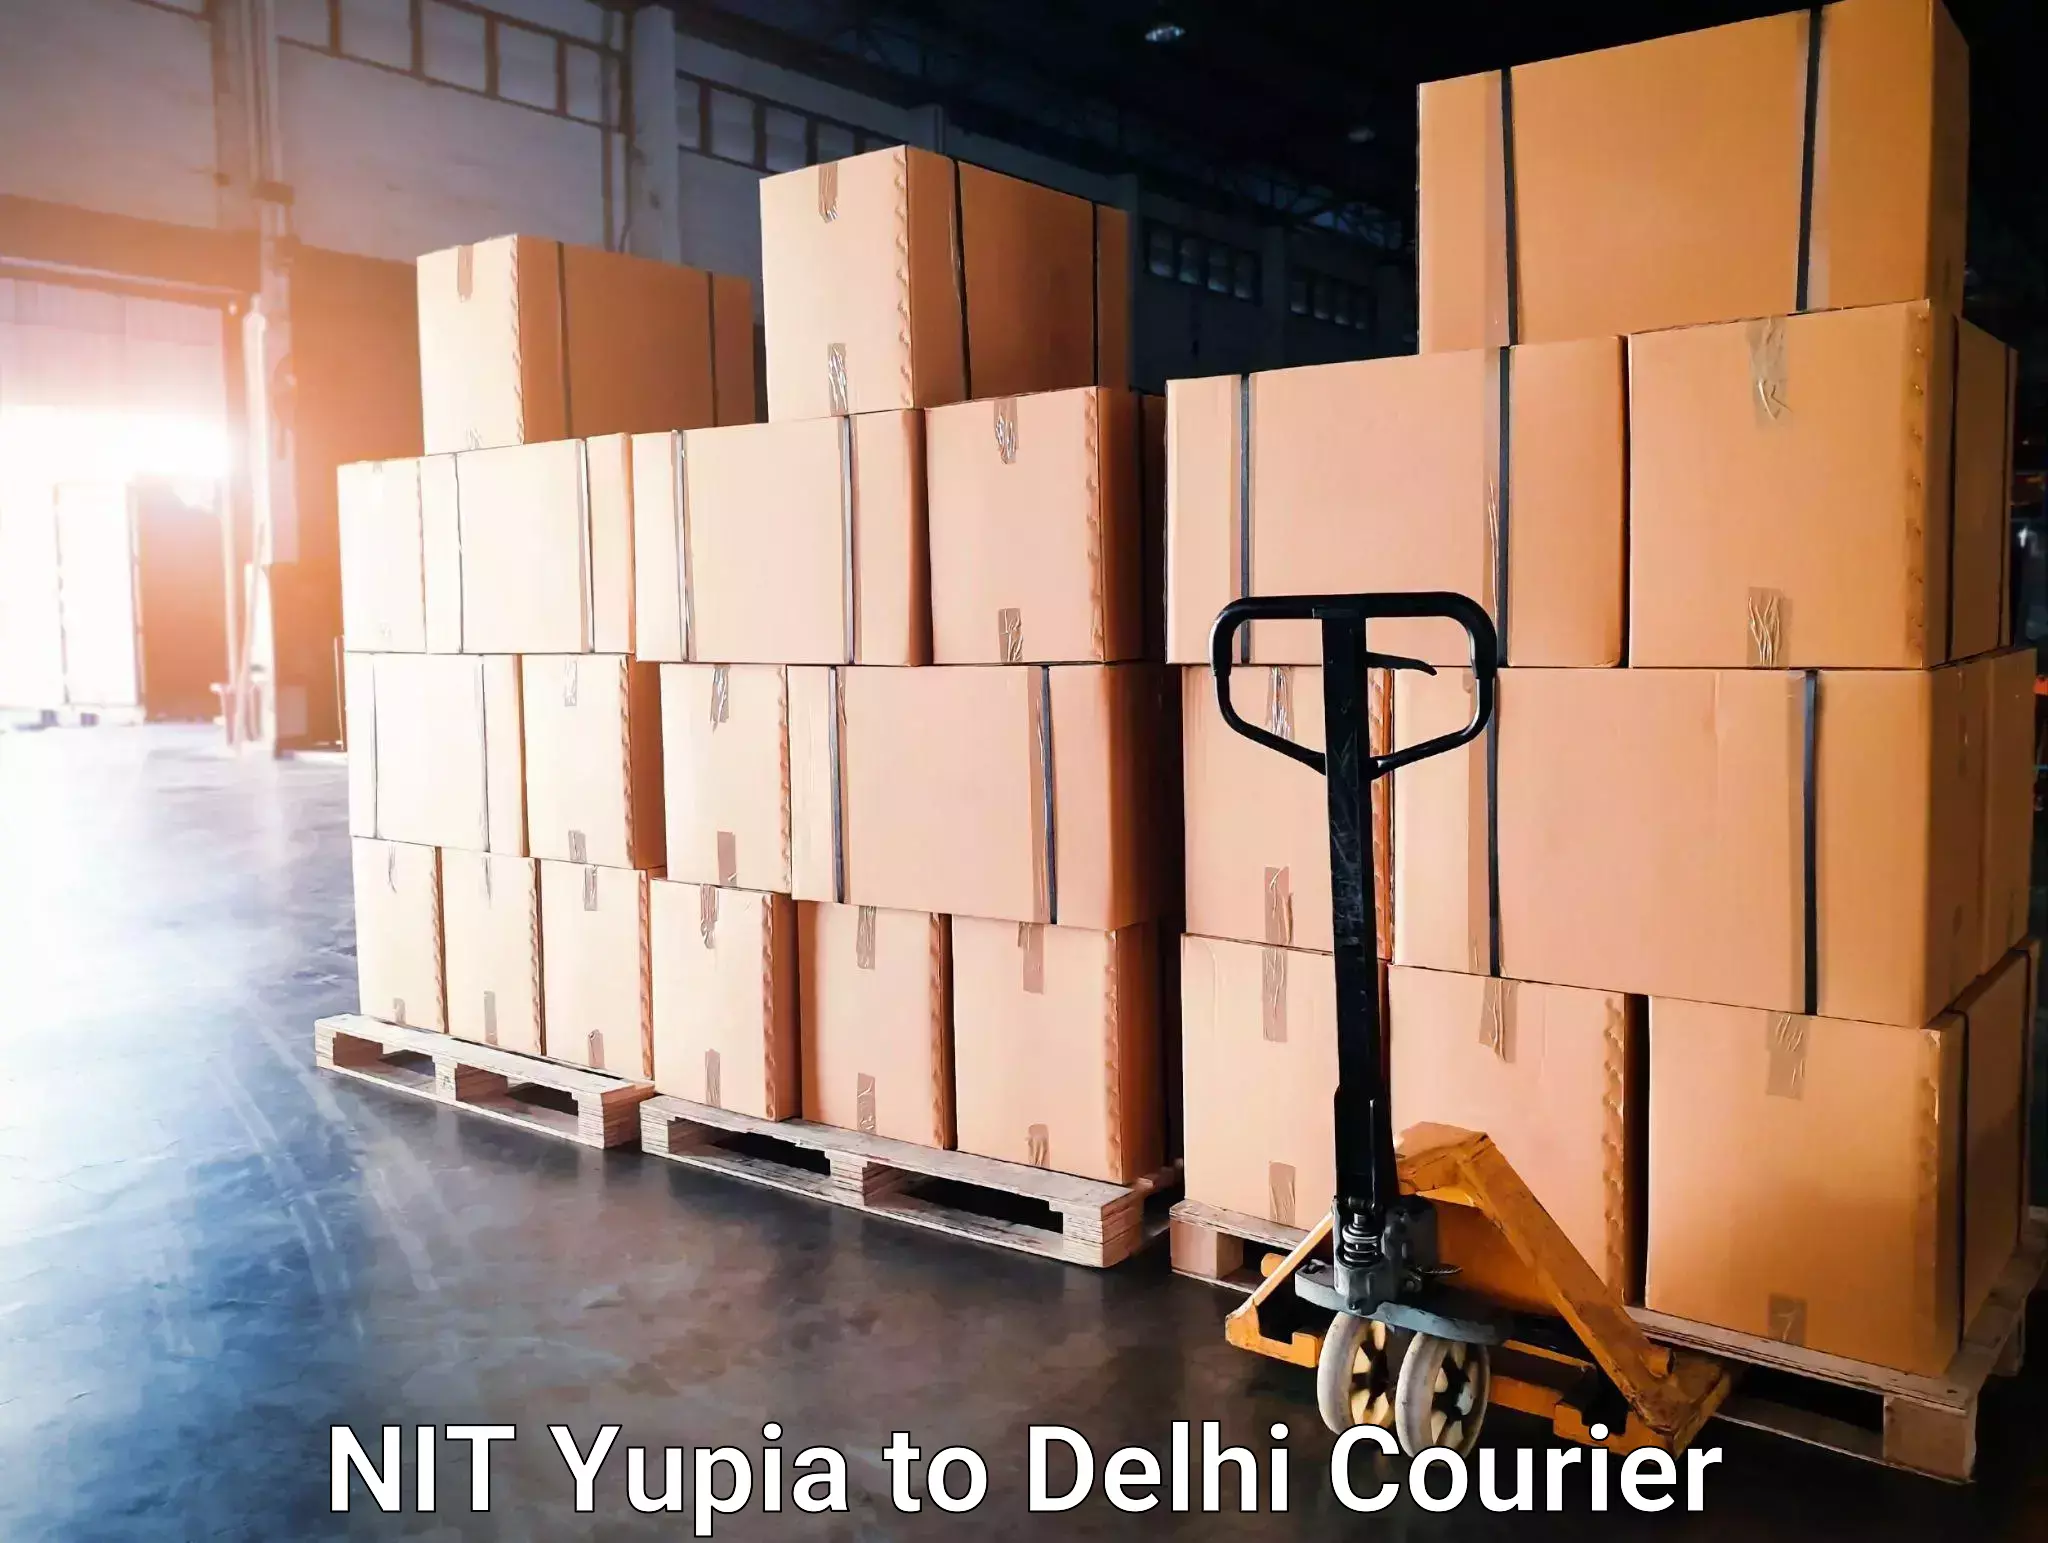 Next day courier NIT Yupia to NCR